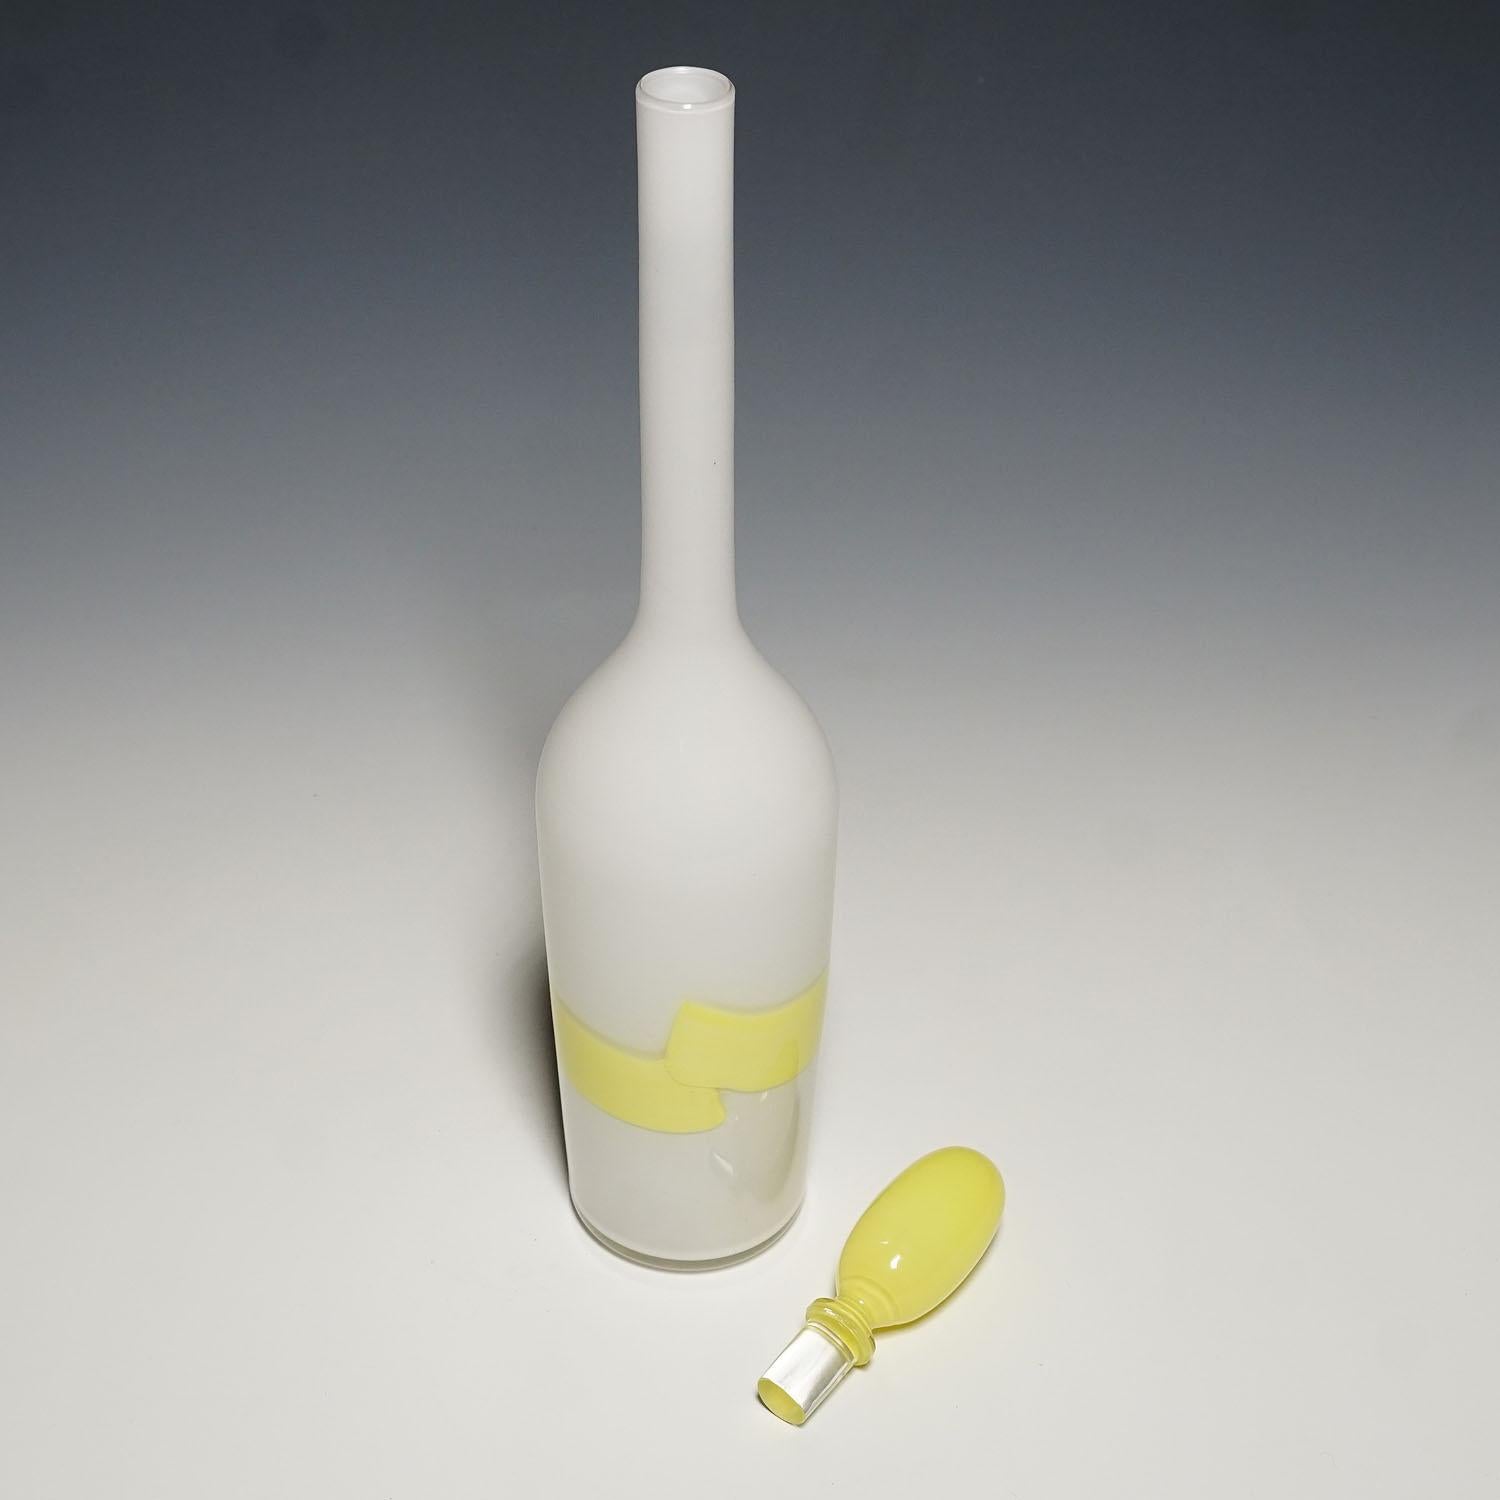 Venini Art Glass Bottle with Fasce Decoration in Yellow, Murano 1950s For Sale 1